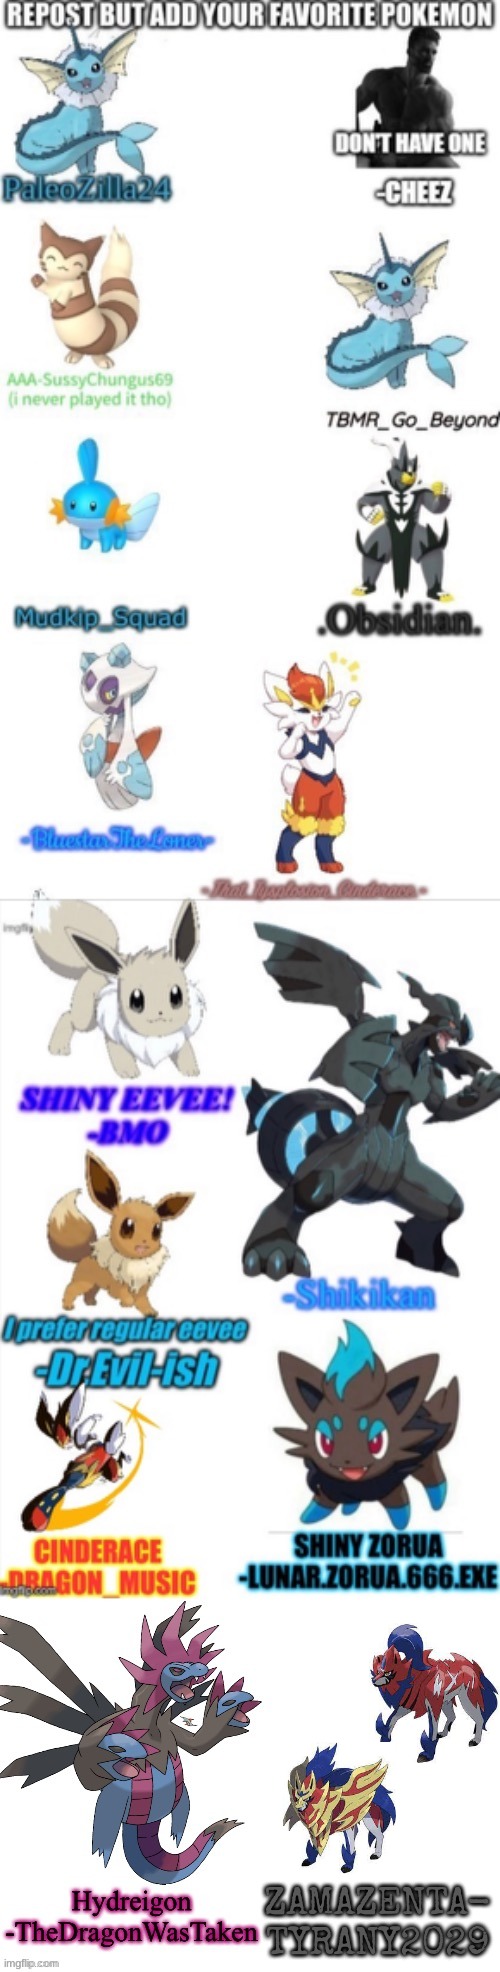 plz link the repost in the comments | ZAMAZENTA-
TYRANY2029 | image tagged in pokemon,repost | made w/ Imgflip meme maker